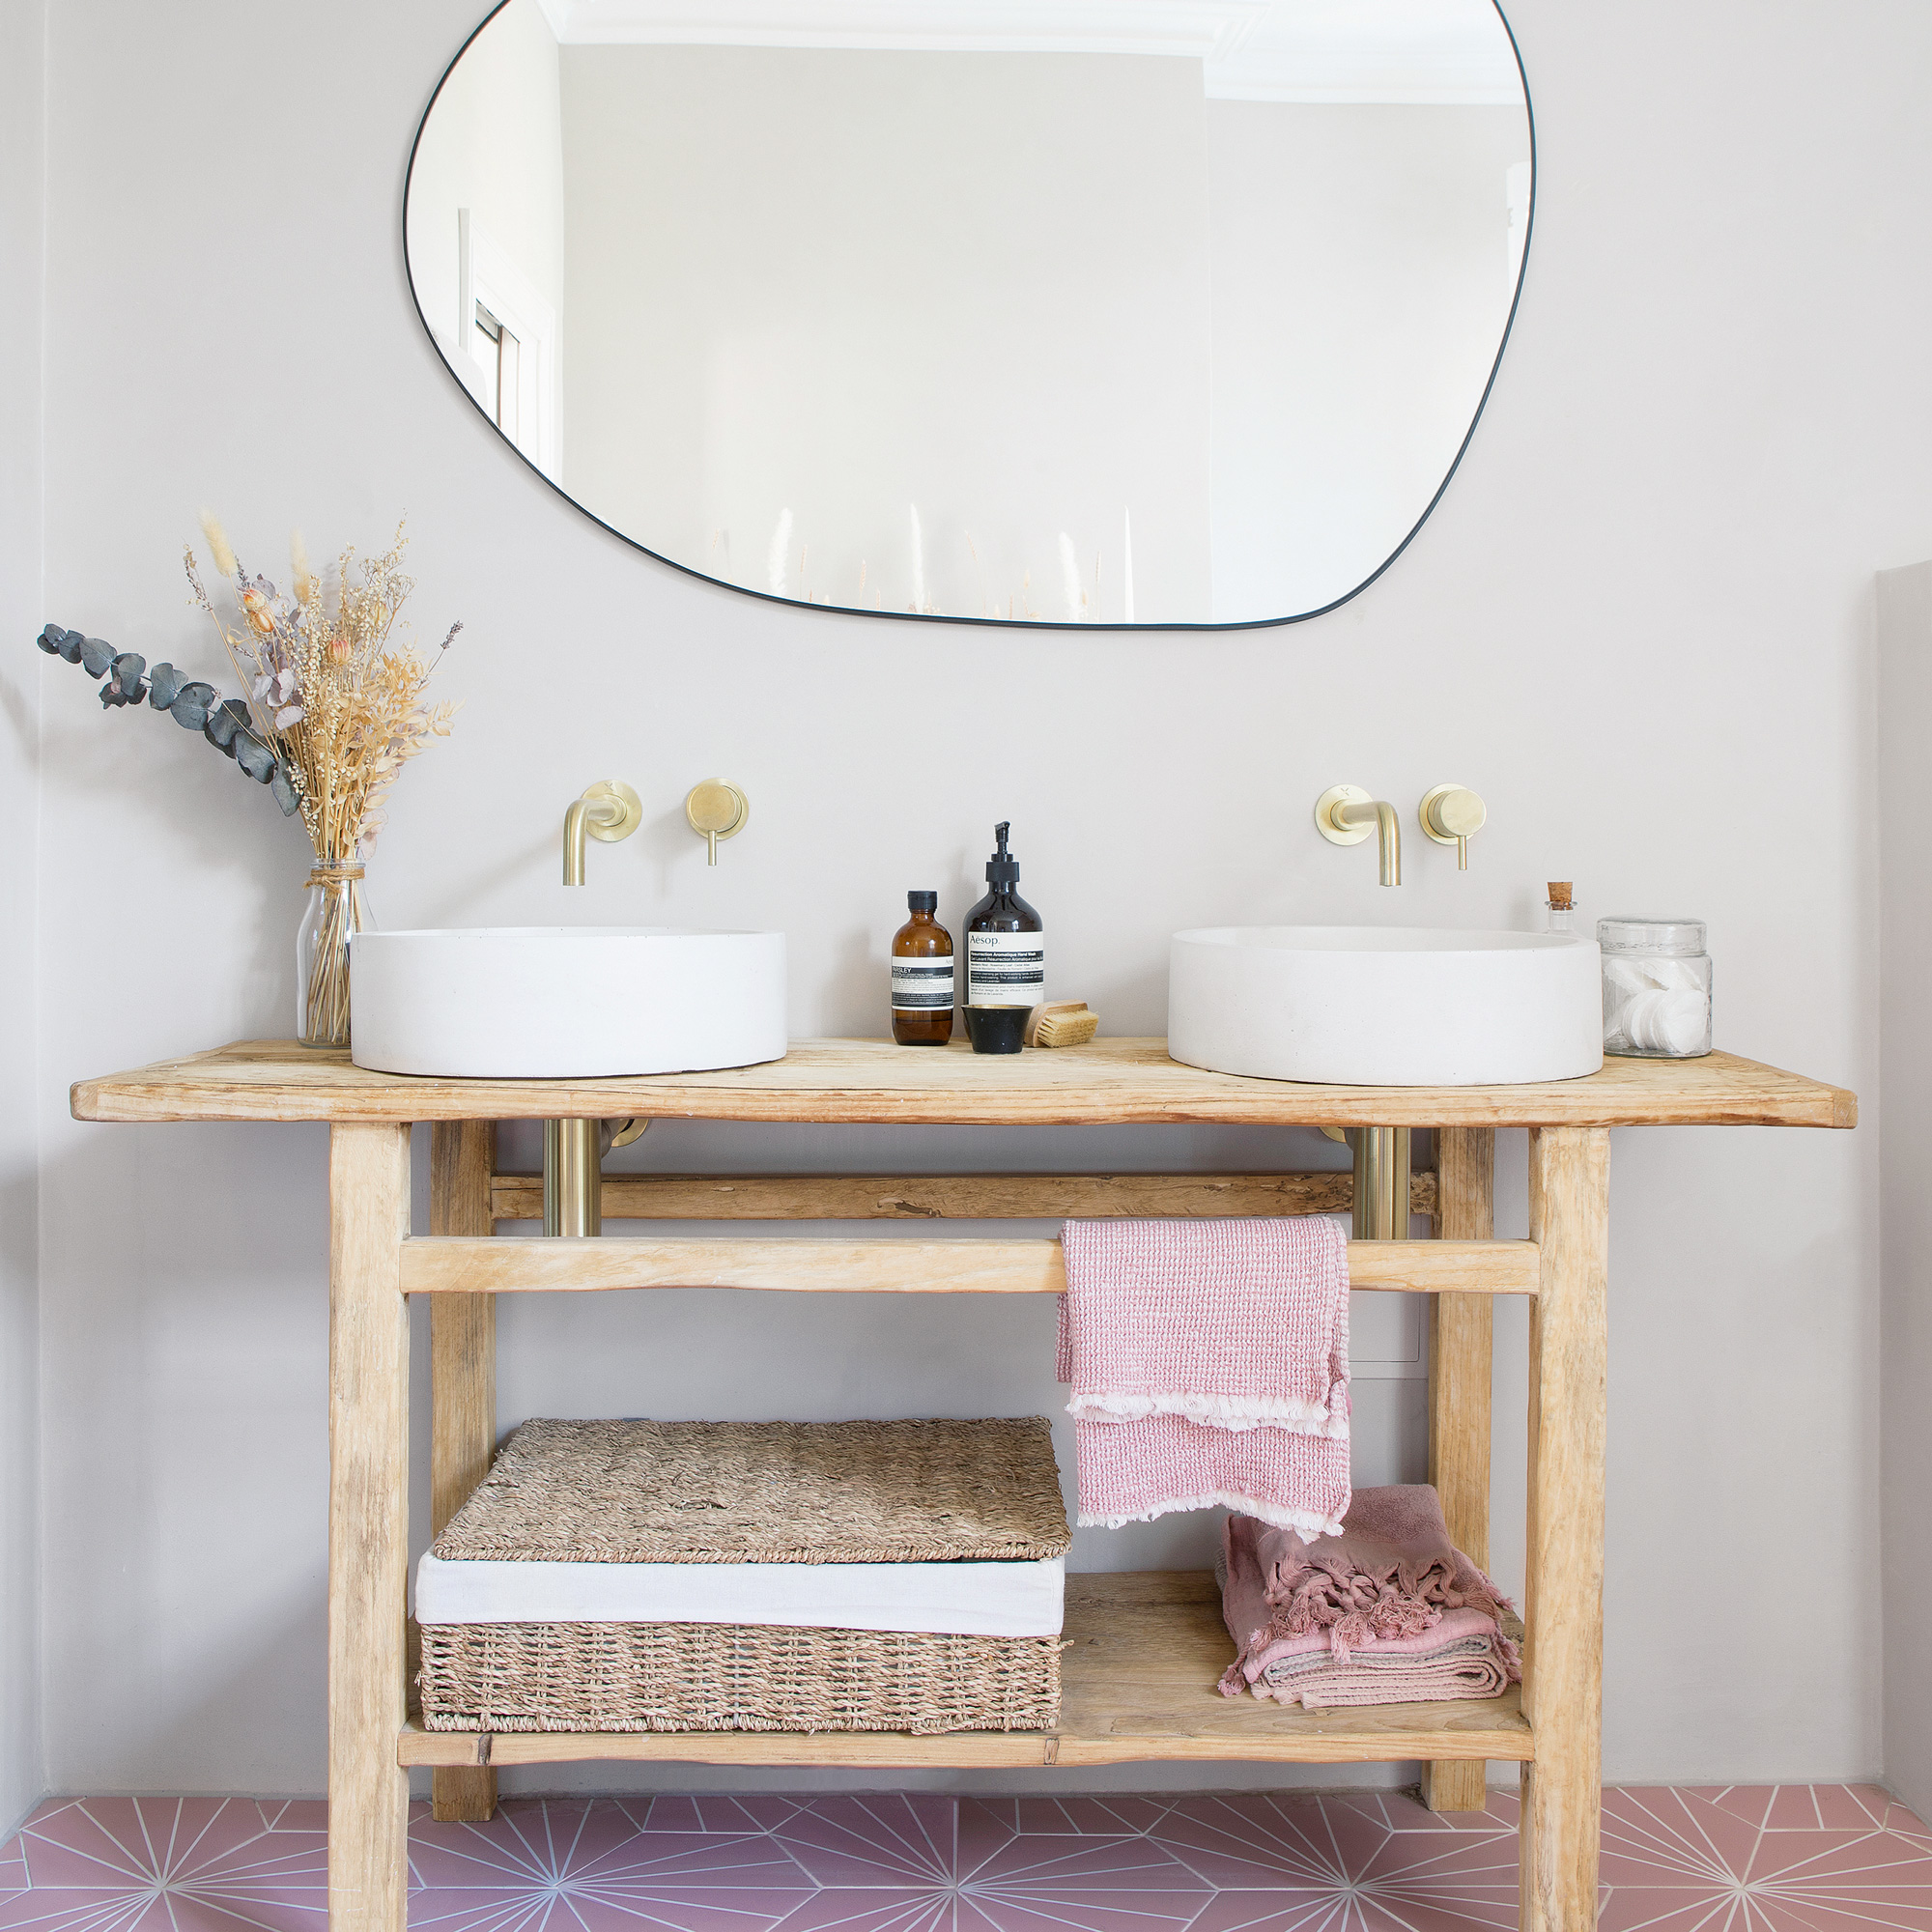 twin round bathroom basins on a pale wood table base and large mirror